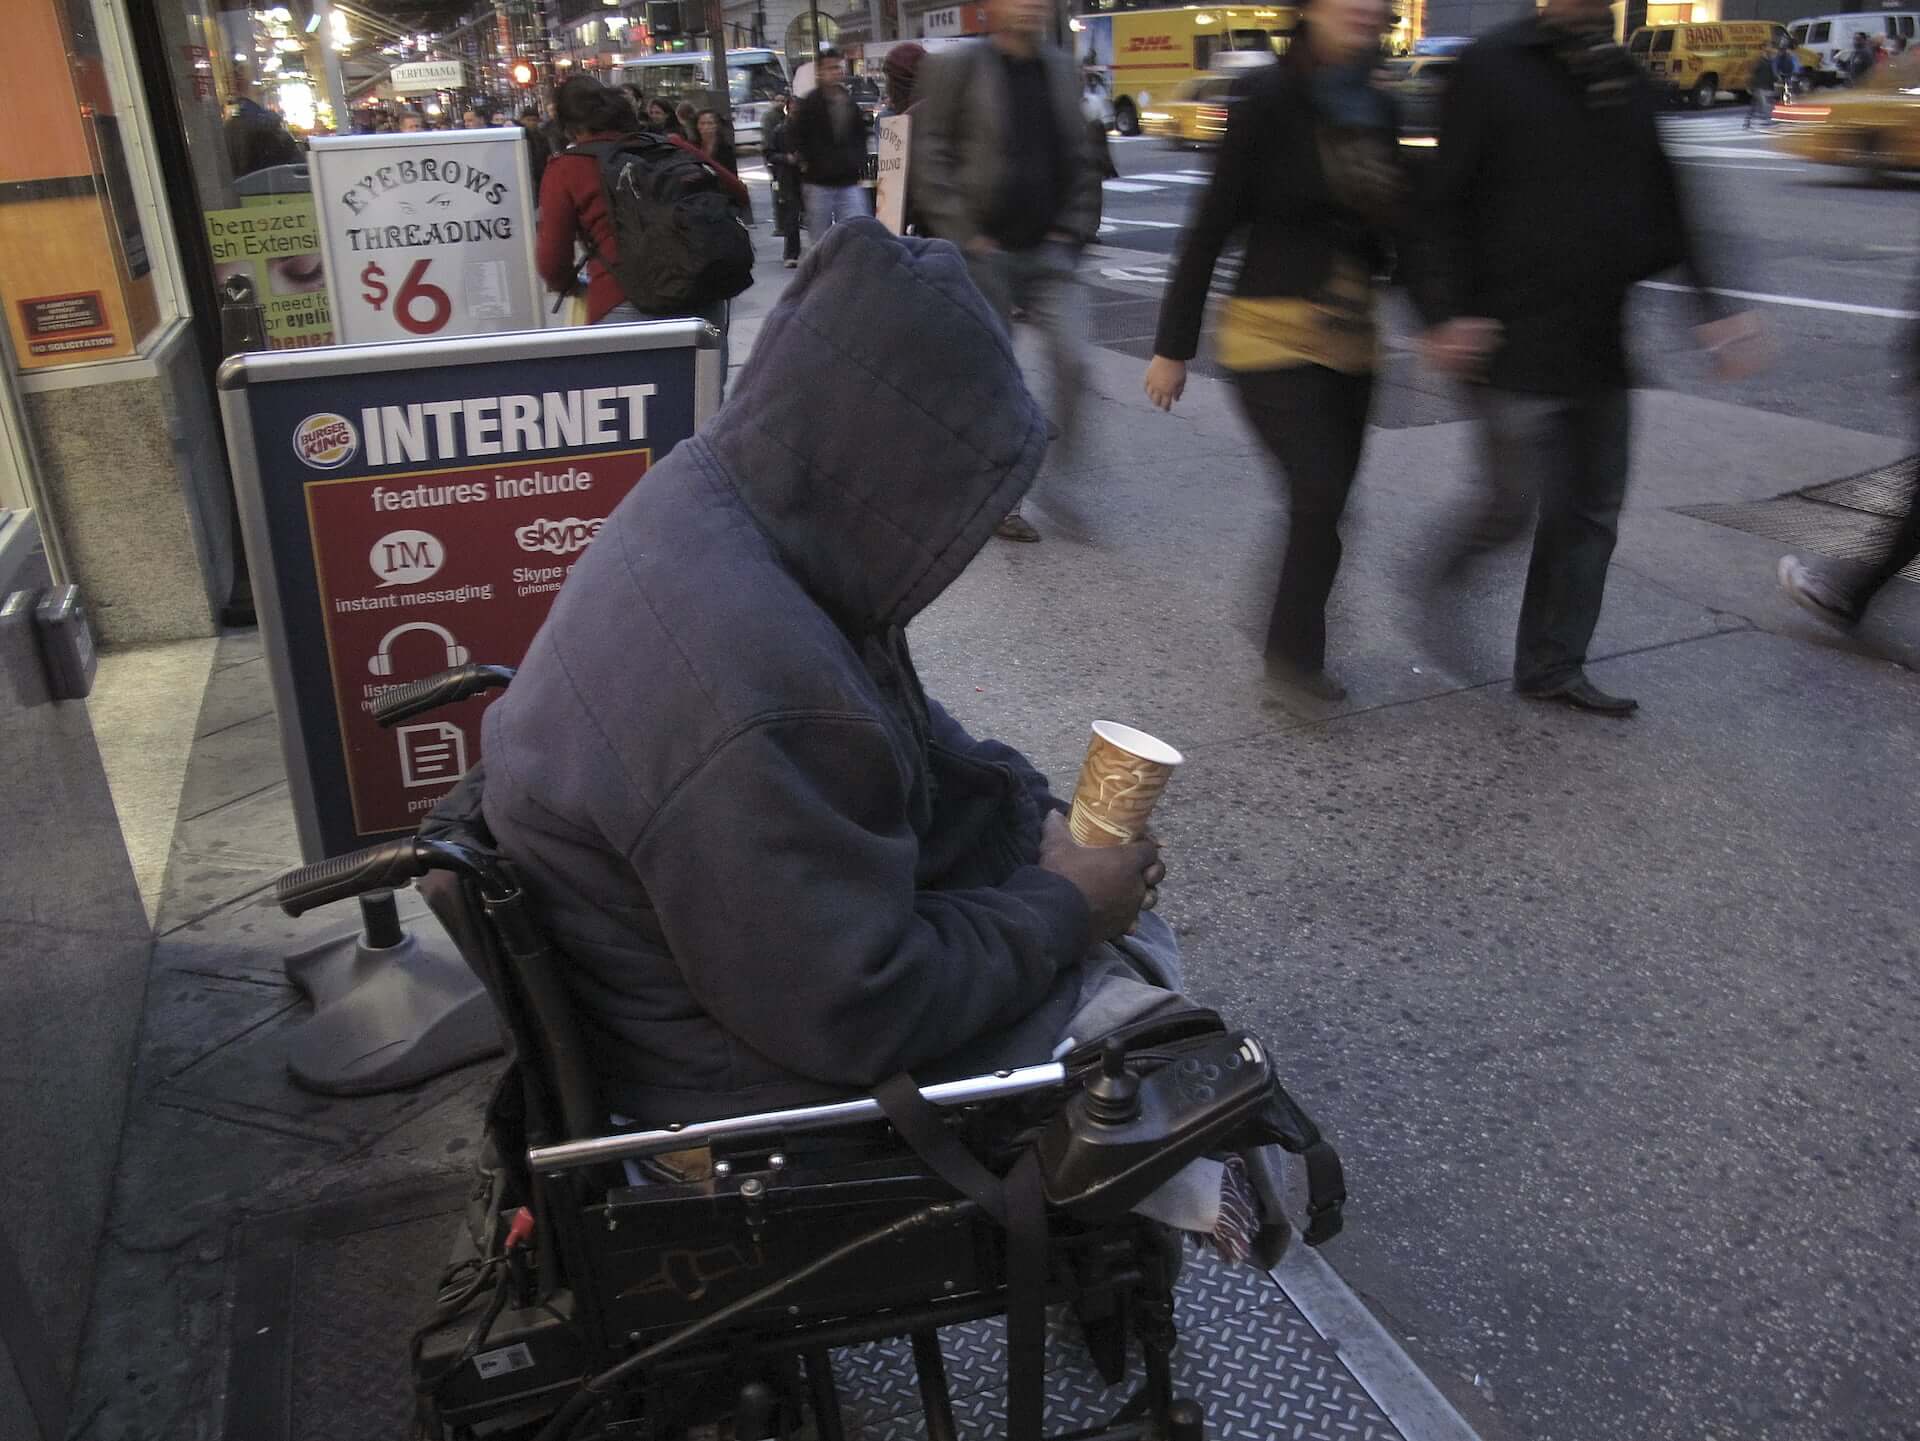 A homeless man with a hoodie covering his head, sits in an electric wheelchair panhandling on a busy New York City street. He holds out an empty coffee cup as people quickly pass by.